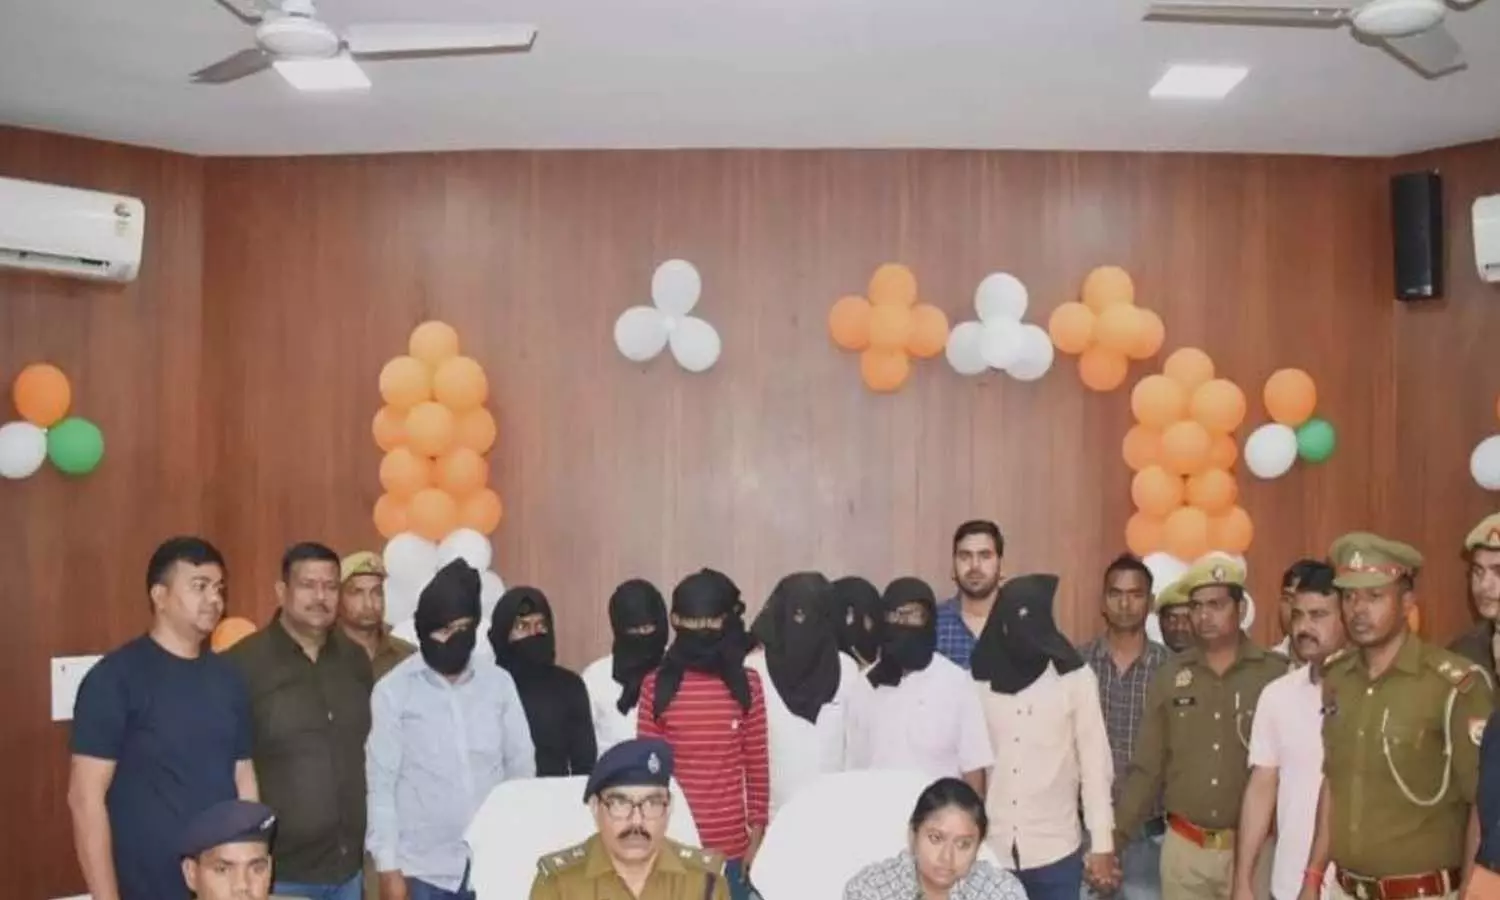 Board exam solver gang busted in Ghazipur, SWAT team arrested 14